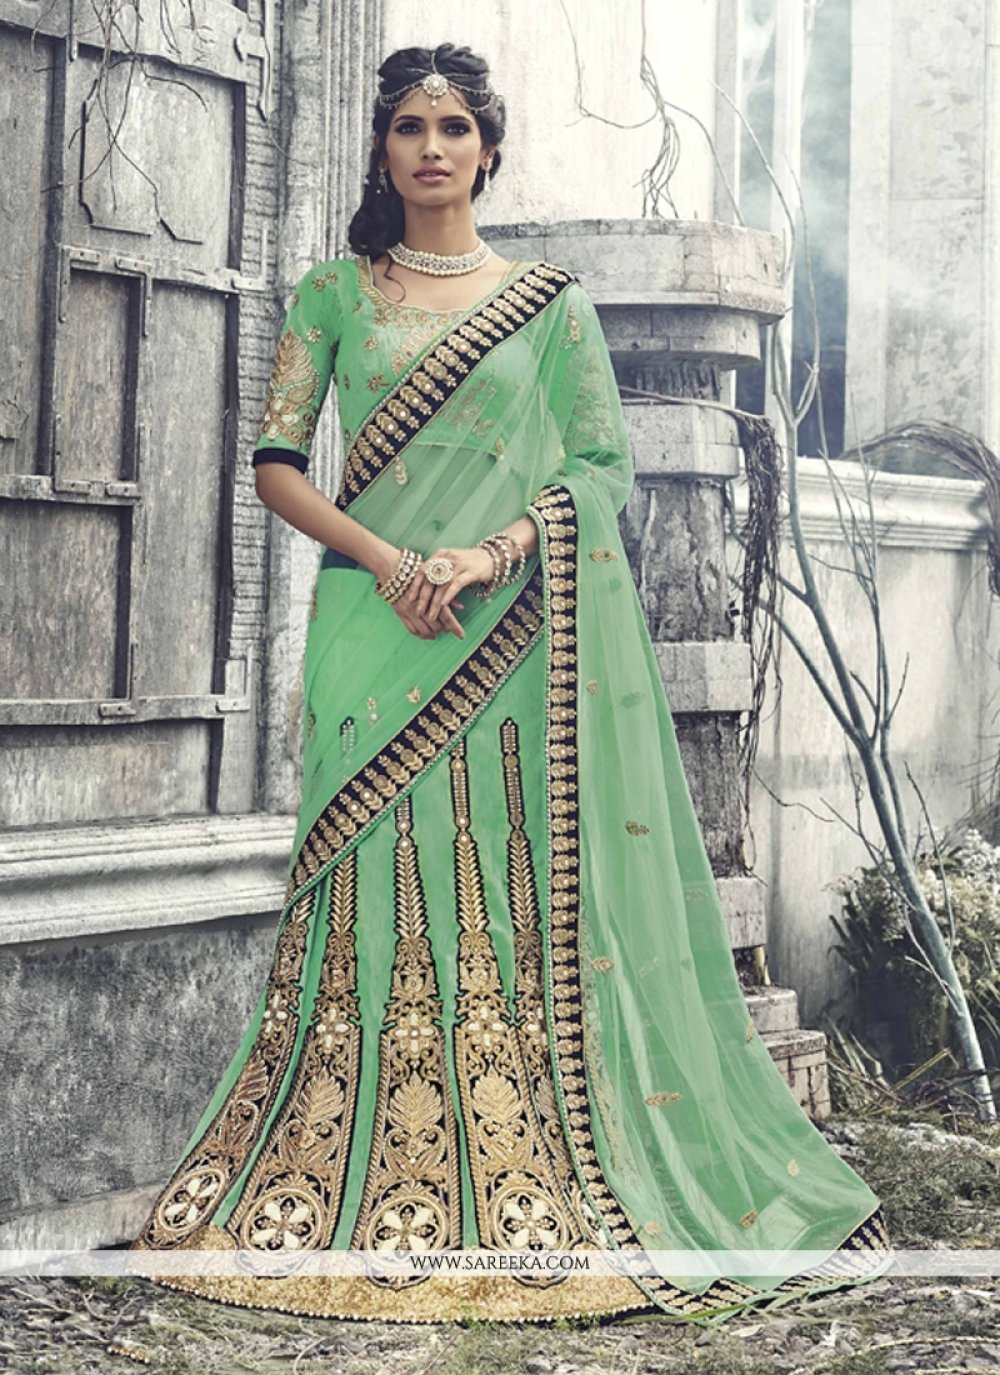 25 + half saree style thought with lehenga in 2021